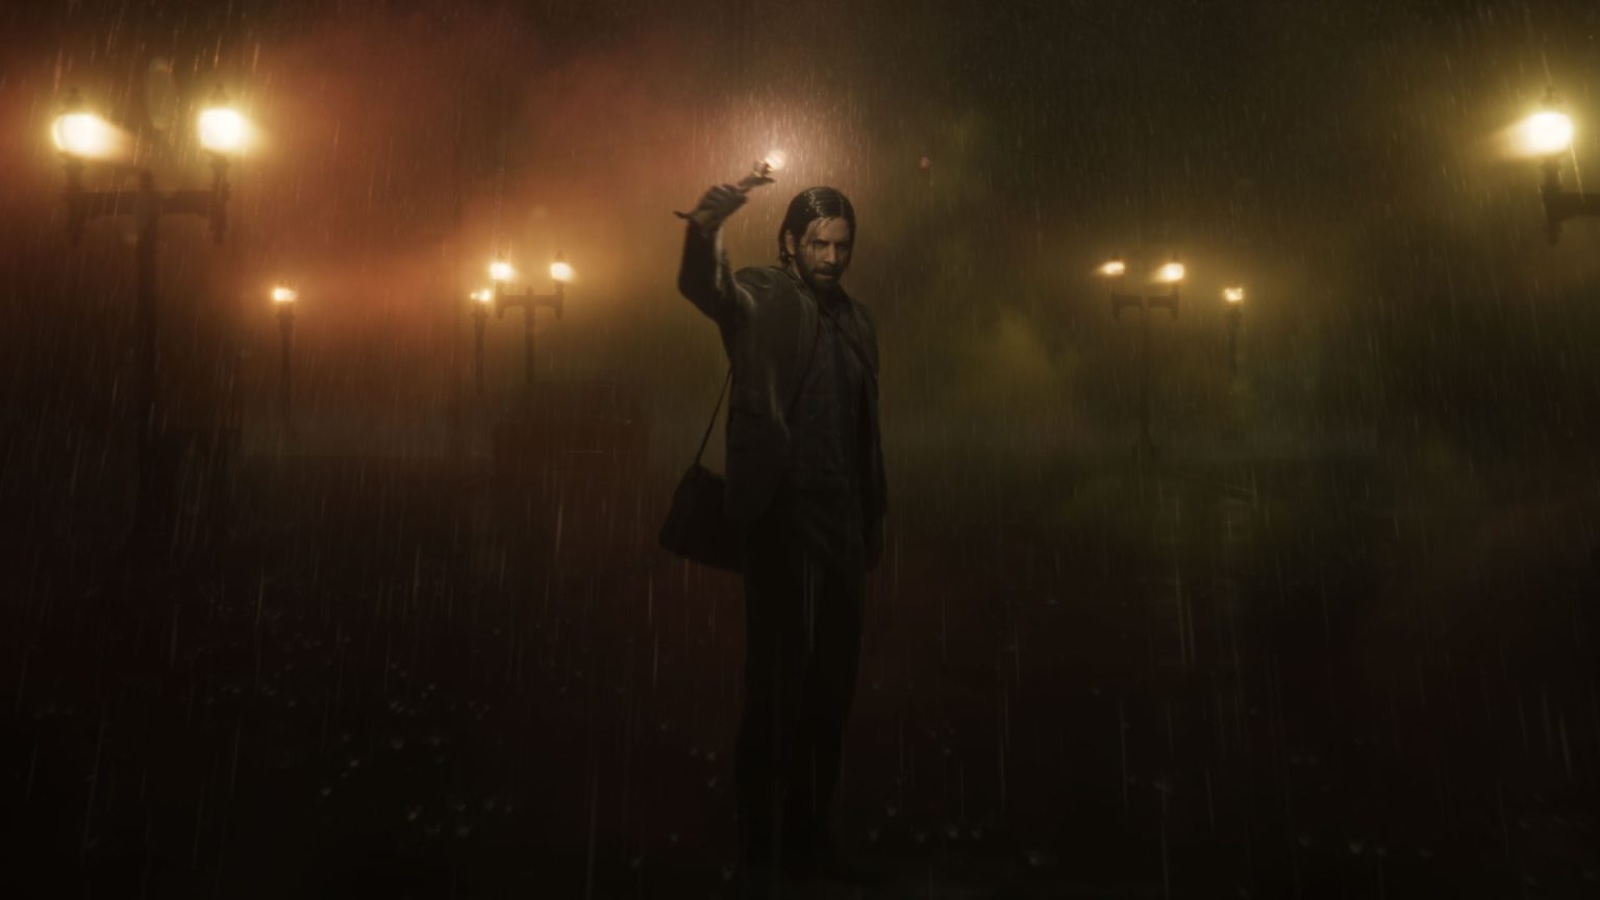 Alan Wake 2 marks the return of the famous writer from the gaming world